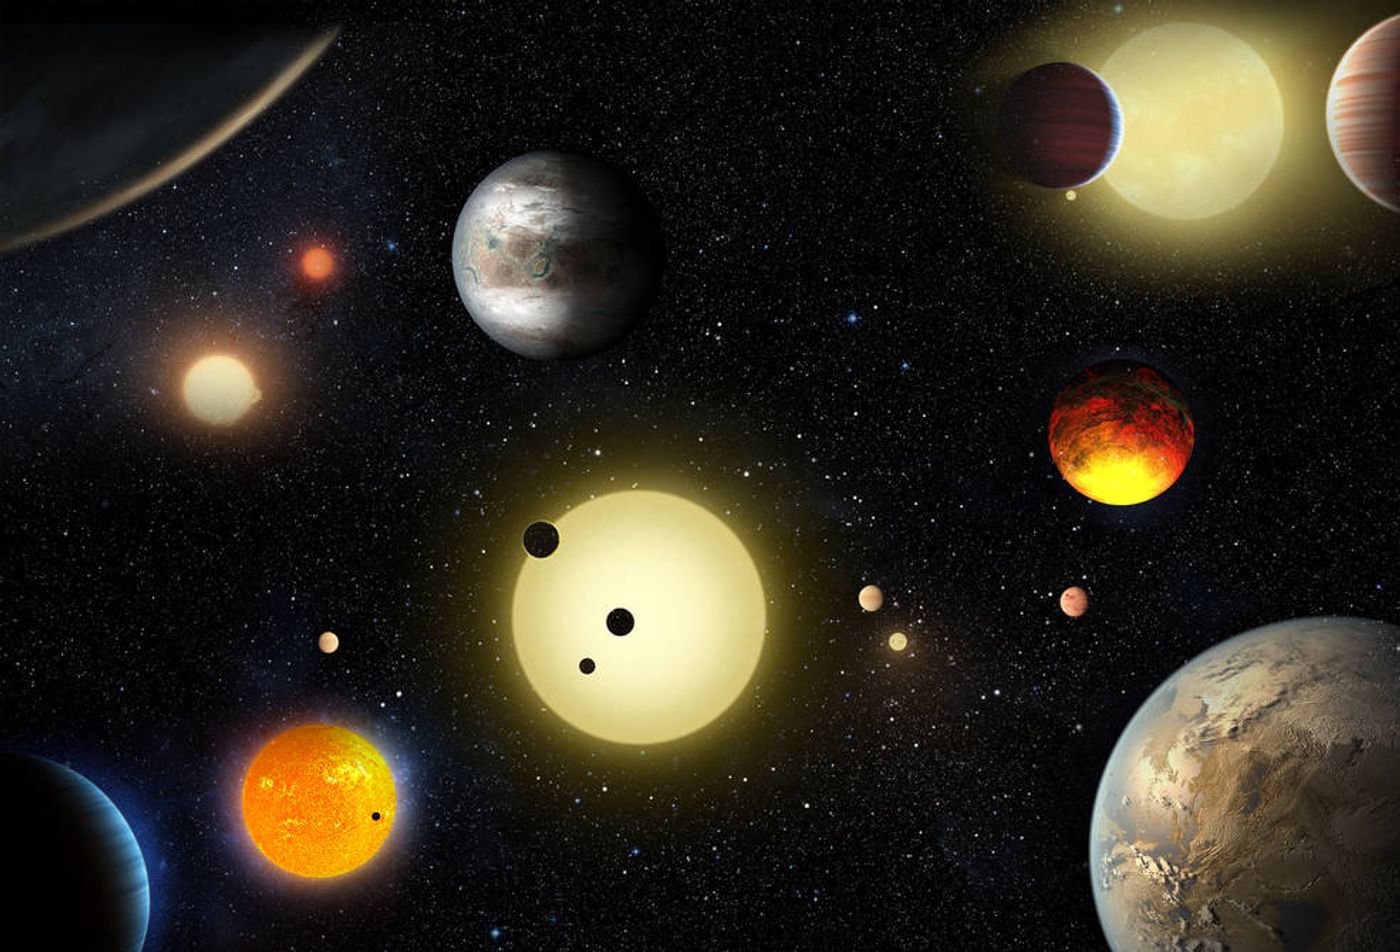 NASA announces that the Kepler mission has found over 1,284 exoplanets throughout the galaxy.